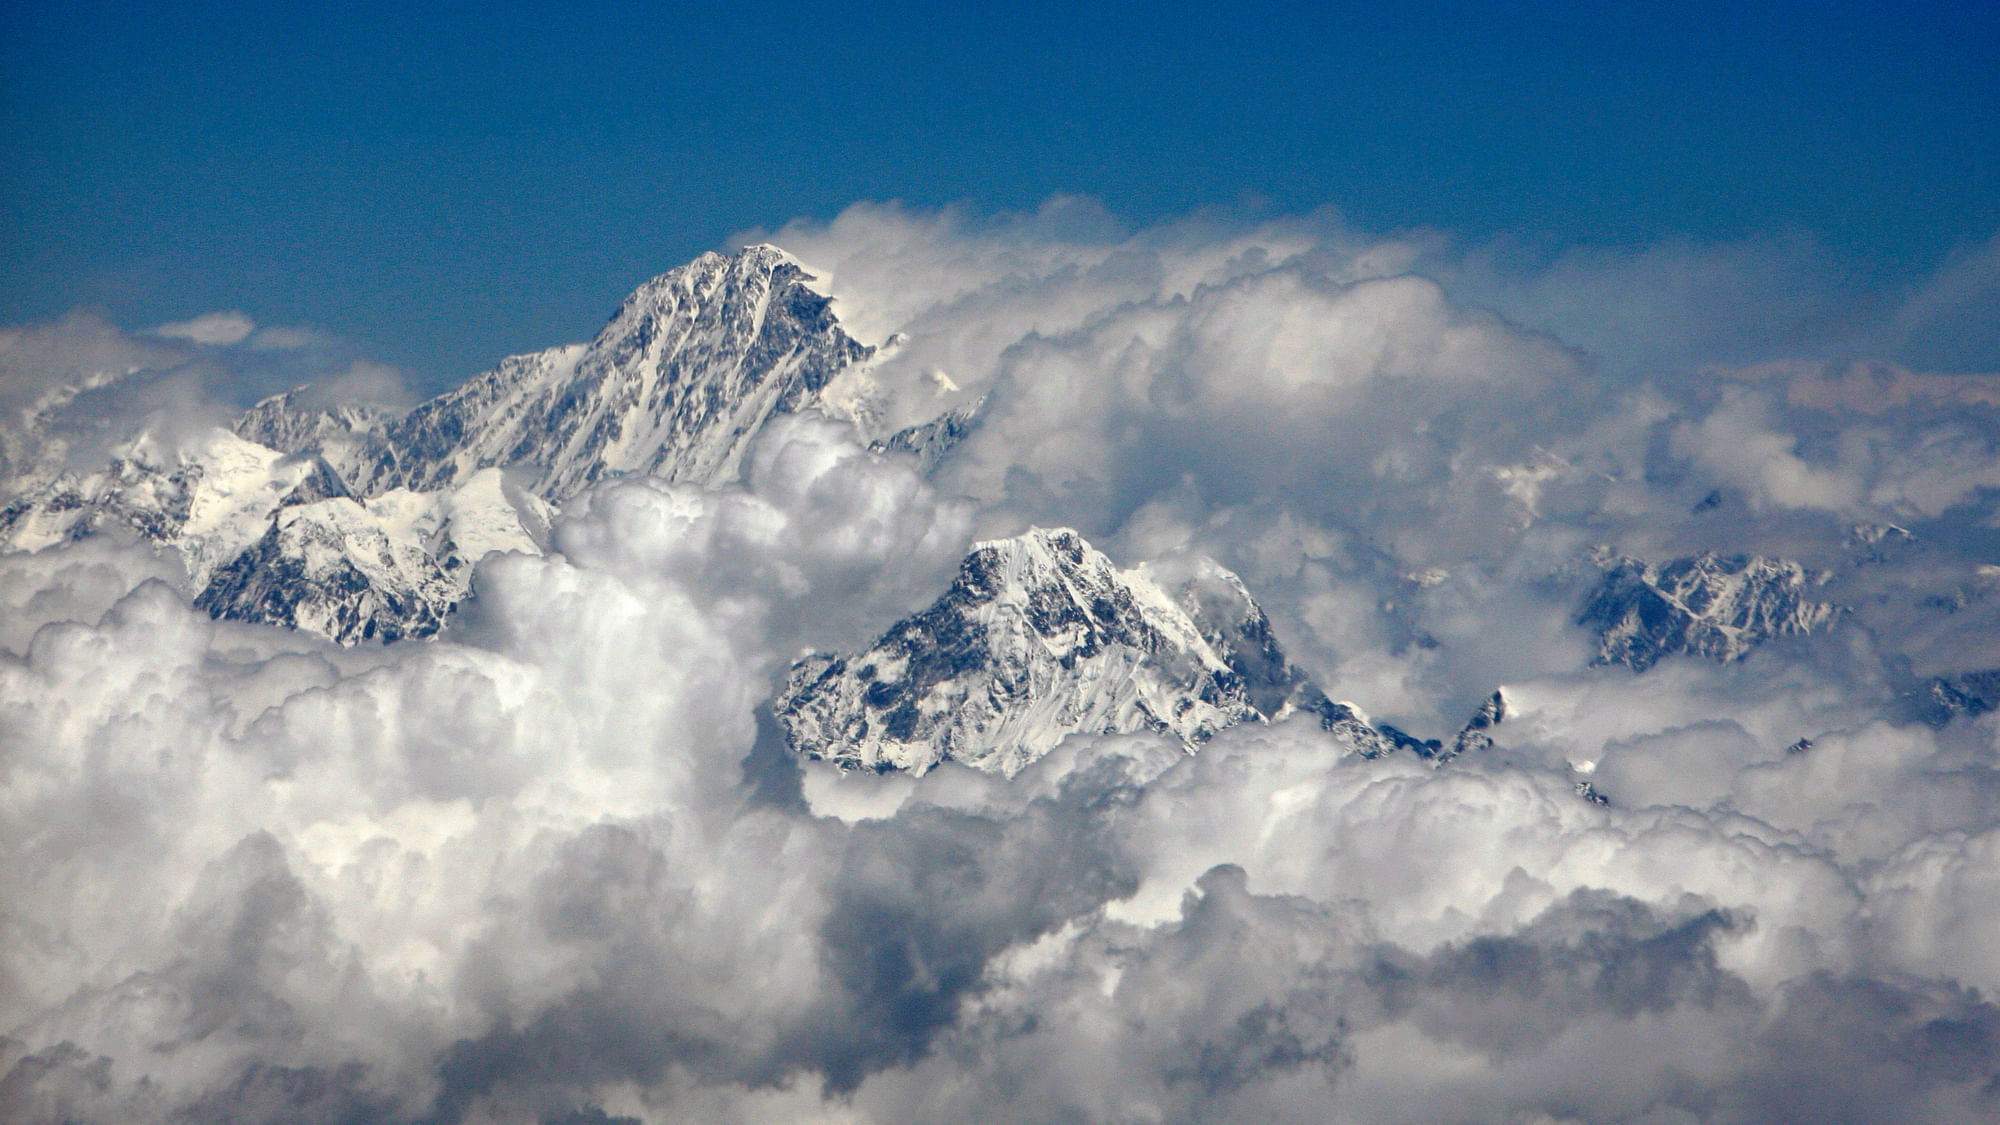 Mount Everest, the highest peak in the world with an altitude of 8.848 metres.